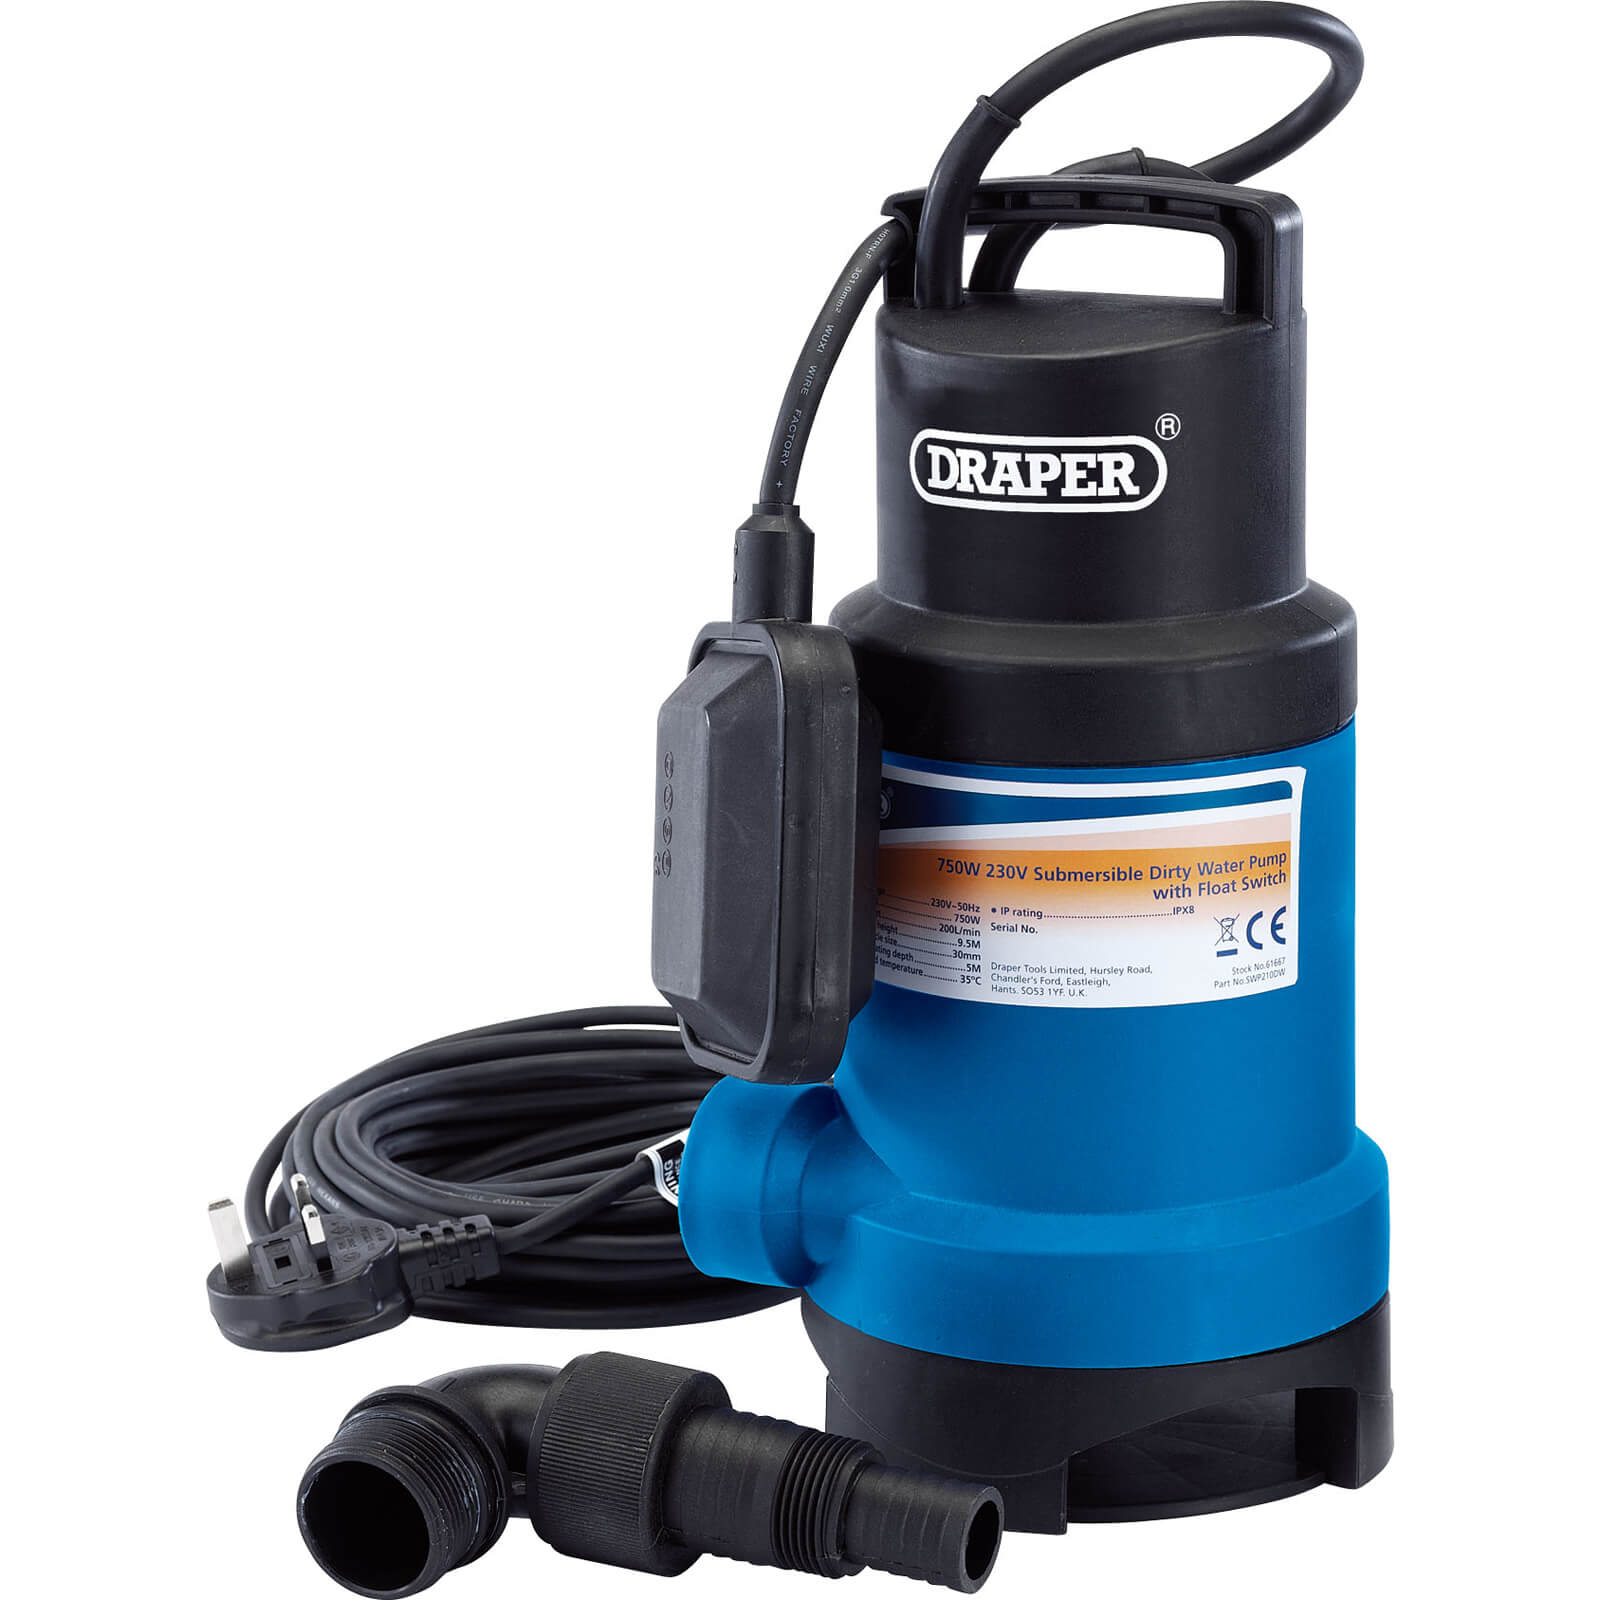 Photo of Draper Swp210dw Submersible Dirty Water Pump 240v